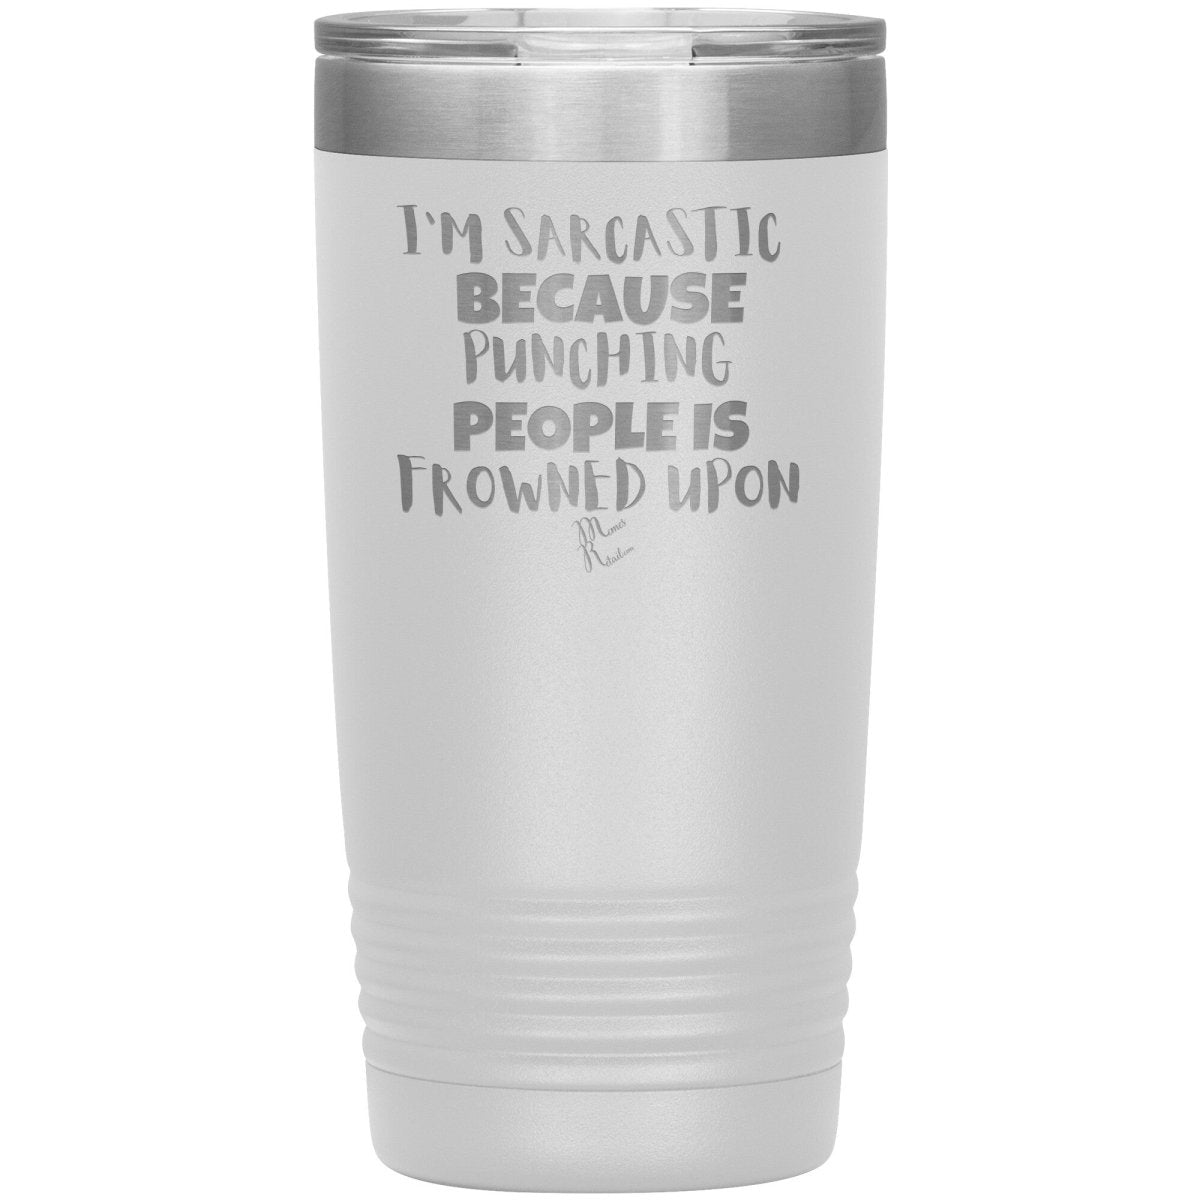 I'm Sarcastic Because Punching People is Frowned Upon Tumblers, 20oz Insulated Tumbler / White - MemesRetail.com